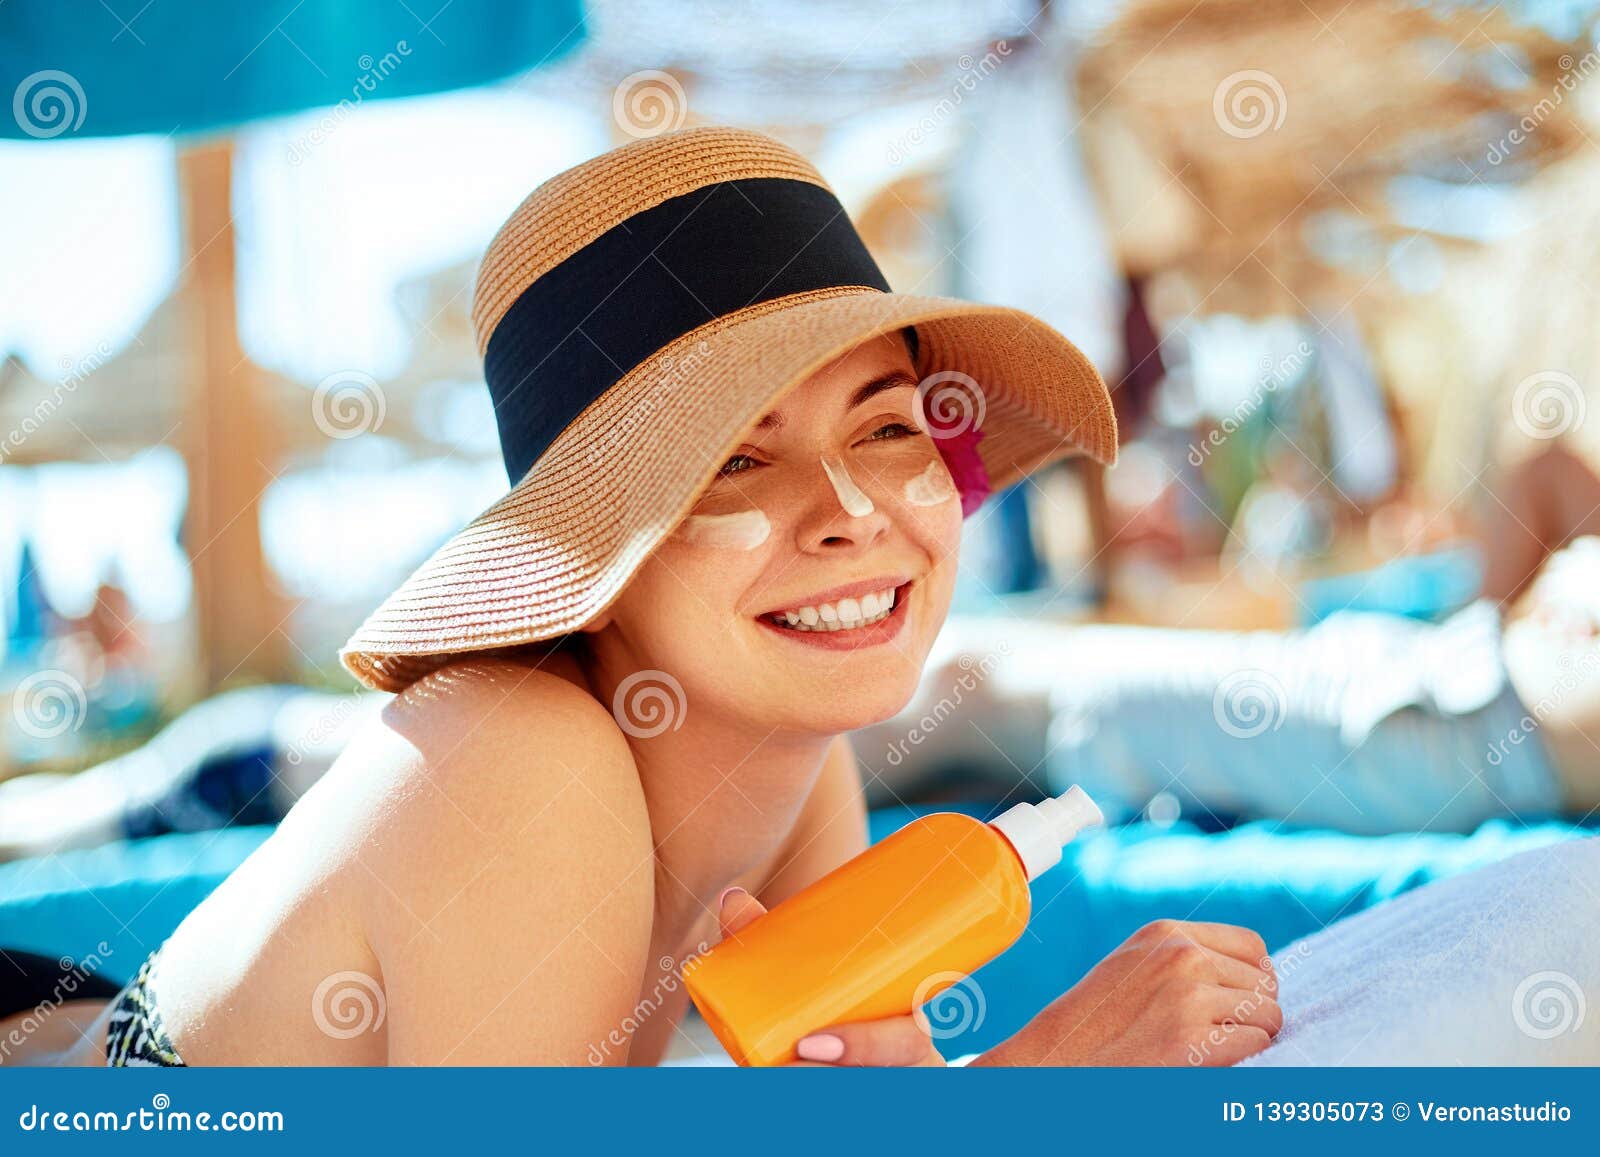 Young Woman with Sun Cream on Face Holding Sunscreen Bottle on the ...